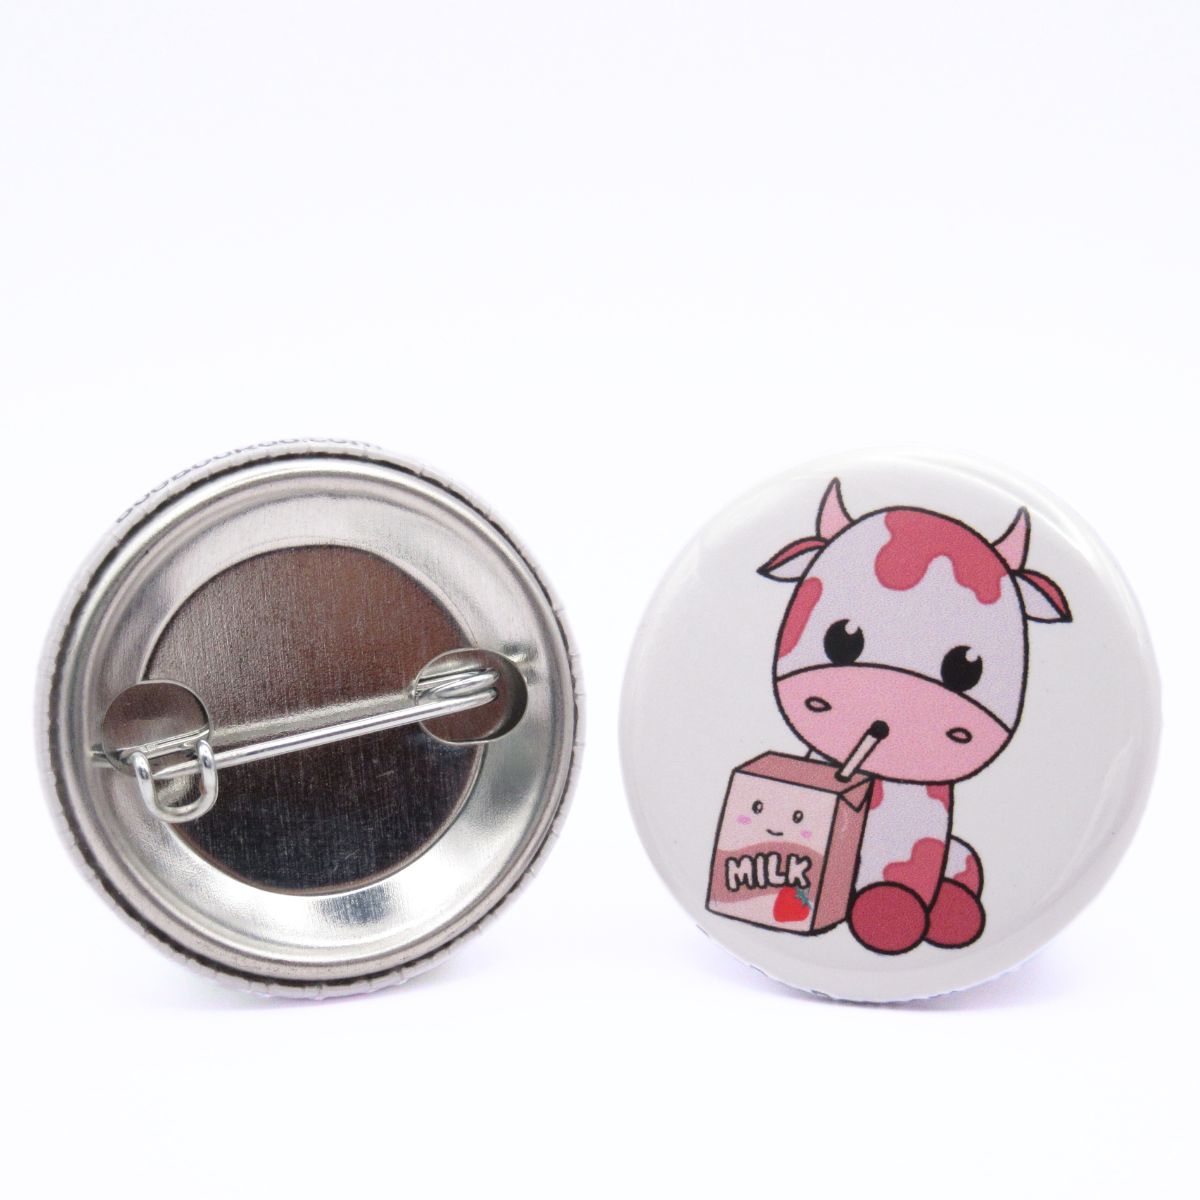 BooBooRoo Pinback Button (i.e. button, badge, pin) of a Cute Kawaii style pink, strawberry cow drinking strawberry milk from a straw from a small milk carton. Image showing front and back of high-quality metal button.